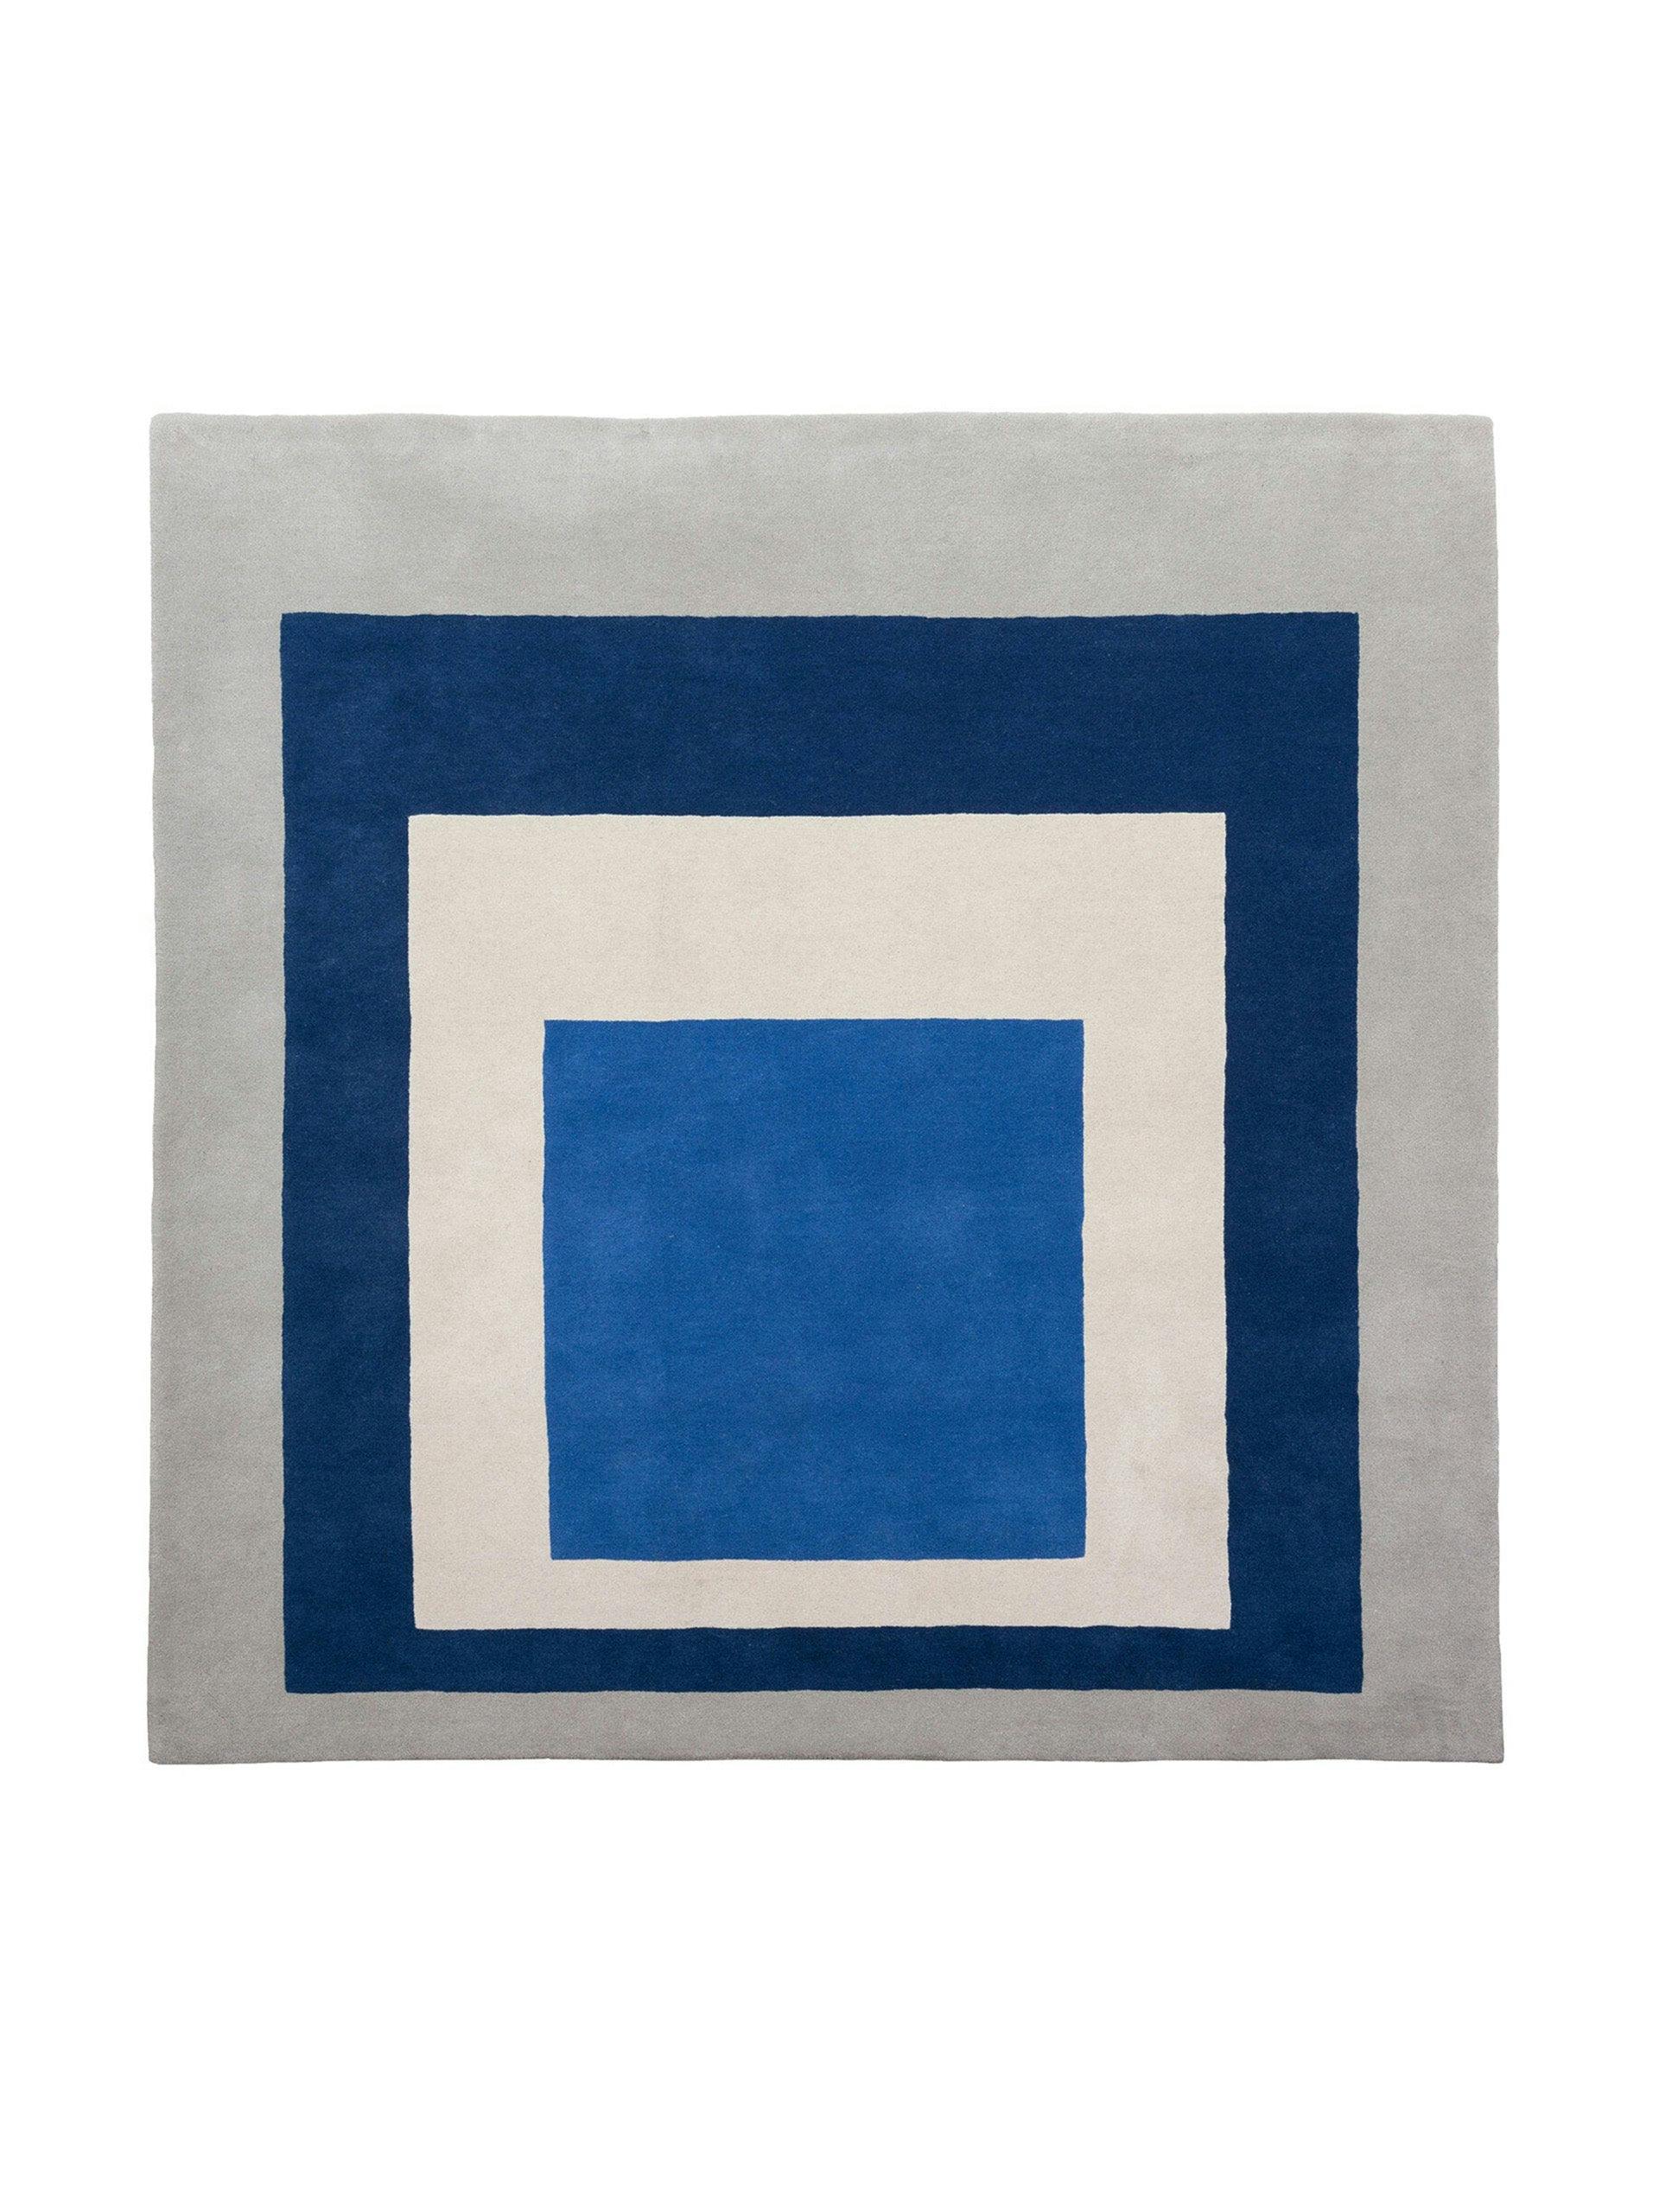 Homage To The Square by Josef Albers rug